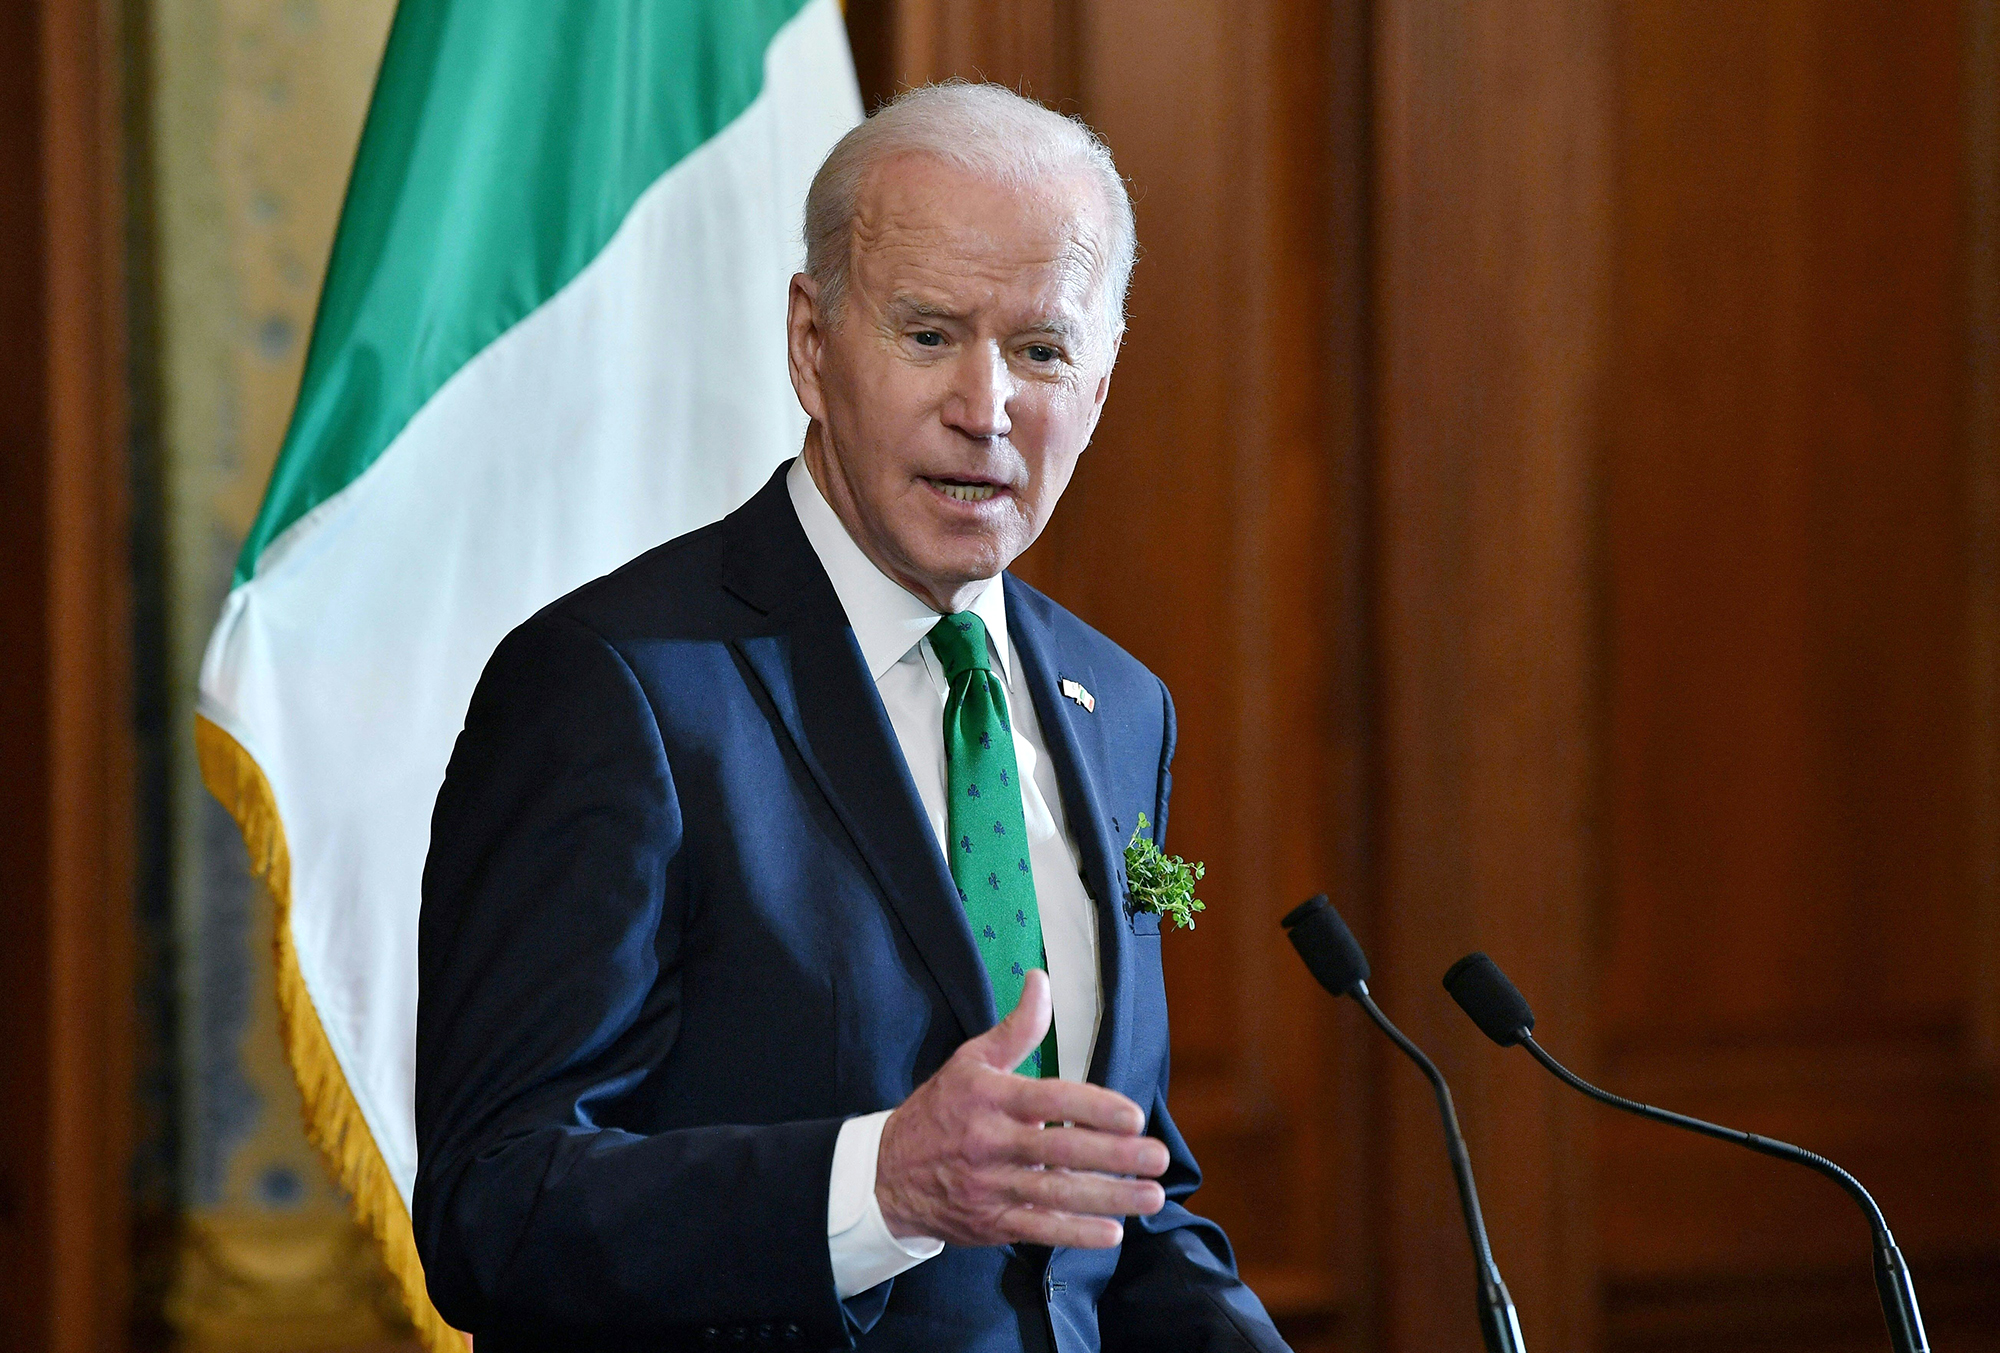 US President Joe Biden speaks during the annual St. Patrick's Day luncheon on March 17 in Washington, DC. 